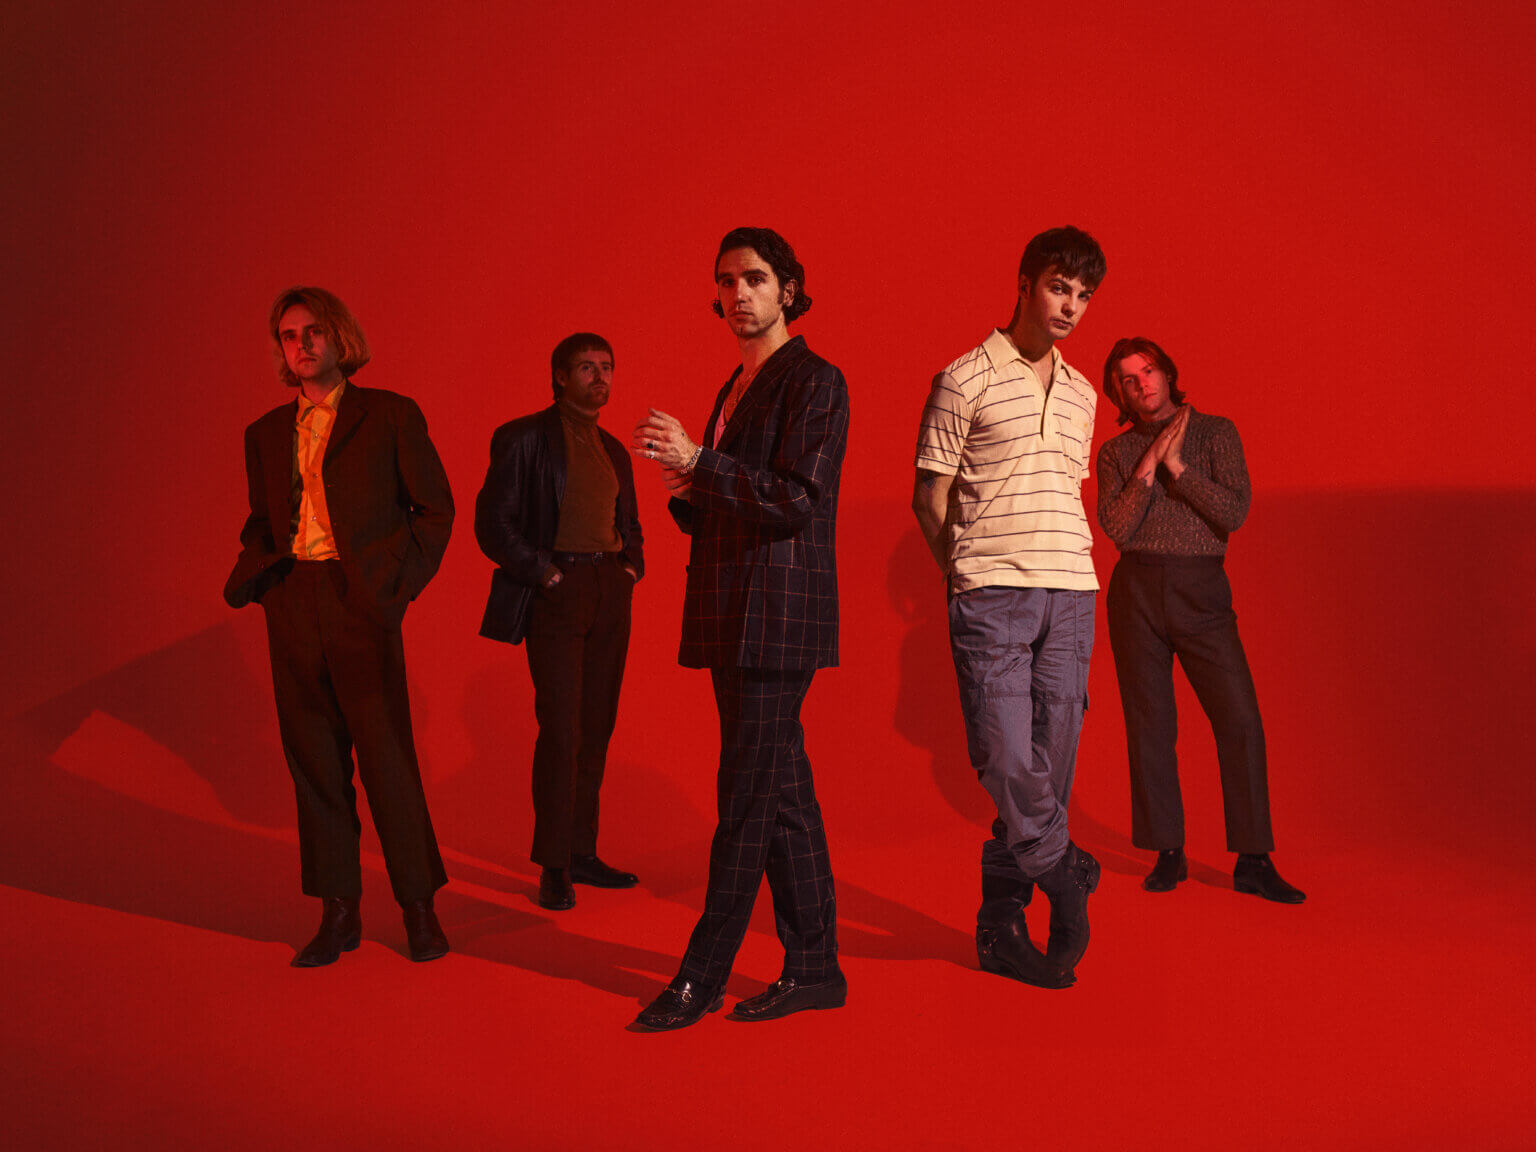 Fontaines D.C. debut video for "I Love You." The track is off their LP Skinty Fia, out April 22, 2022